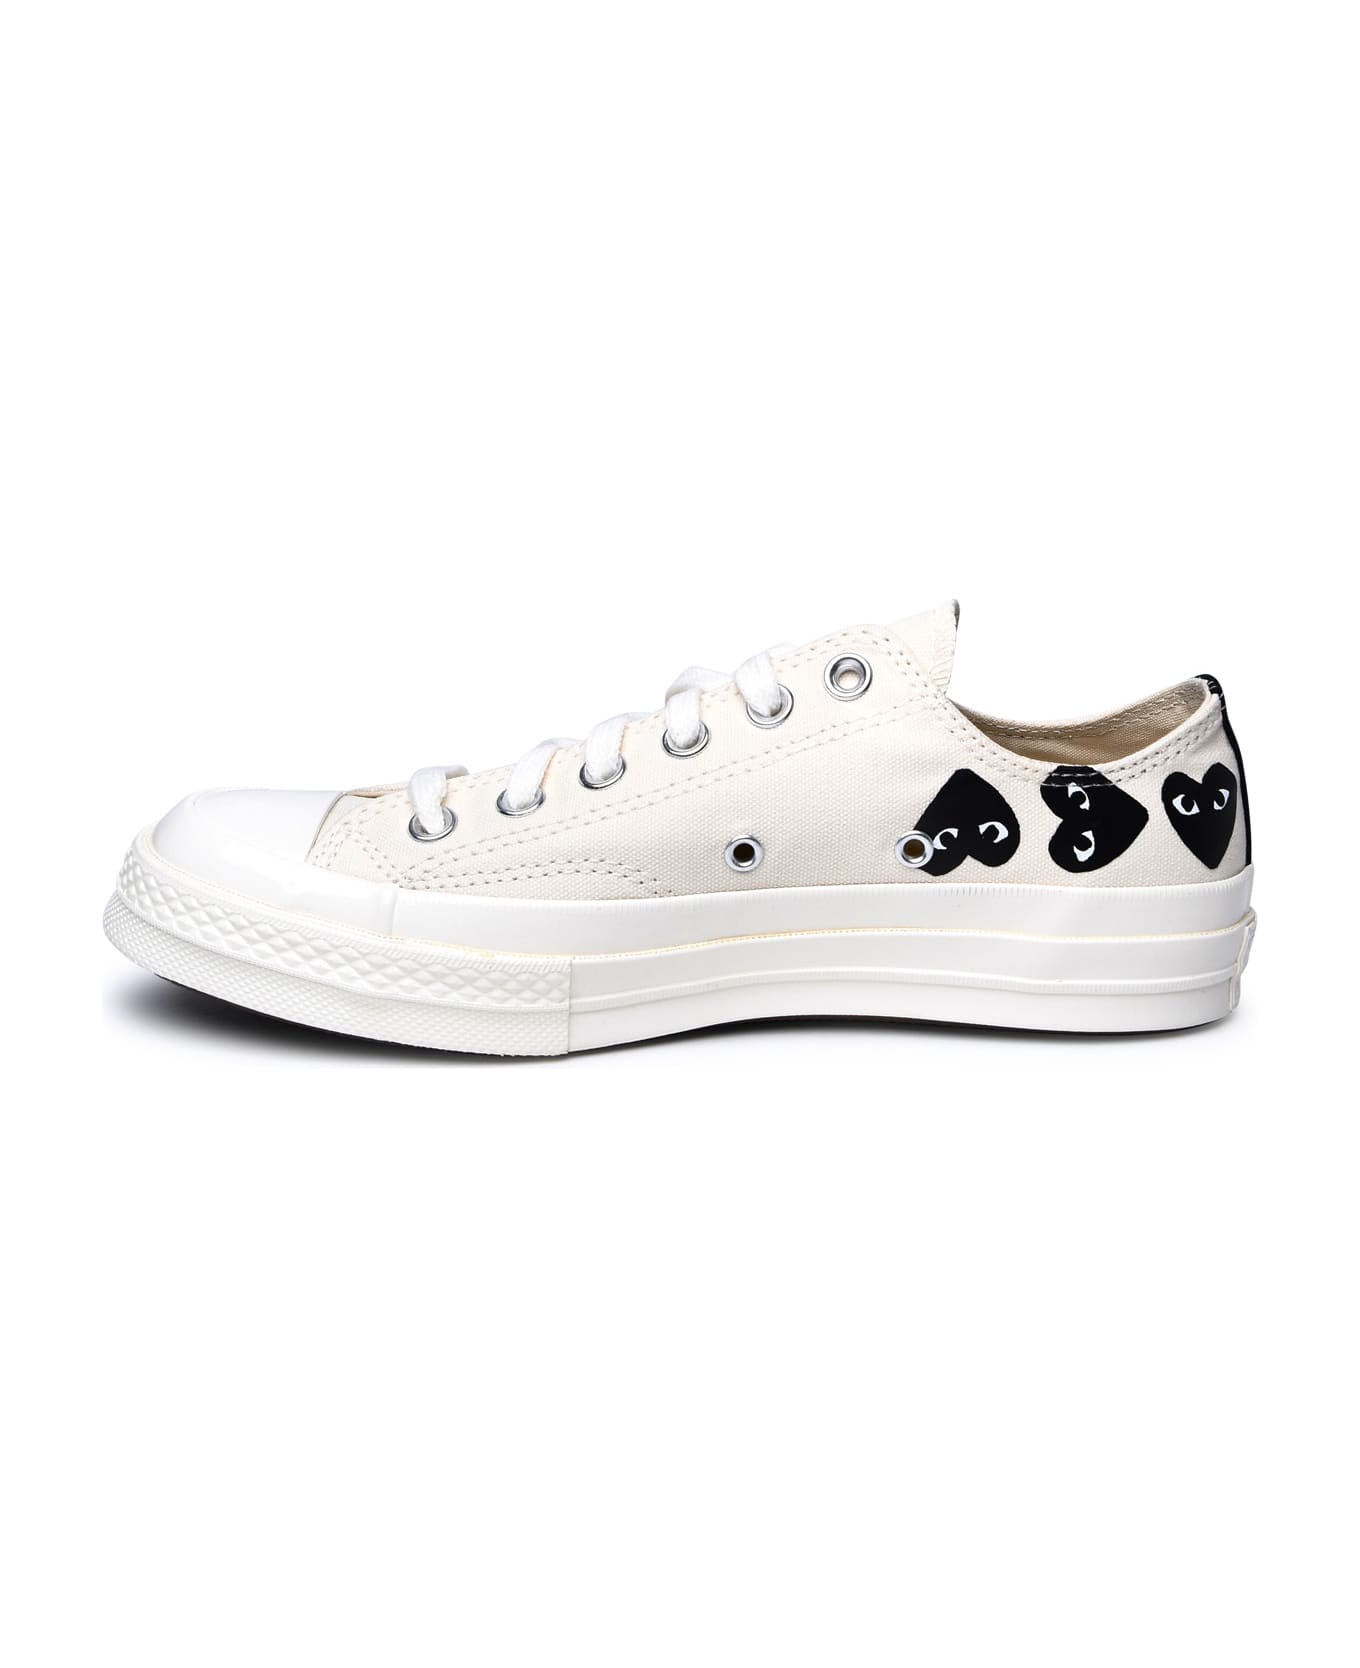 Comme des Garçons Play Ivory Fabric Sneakers - Ivory